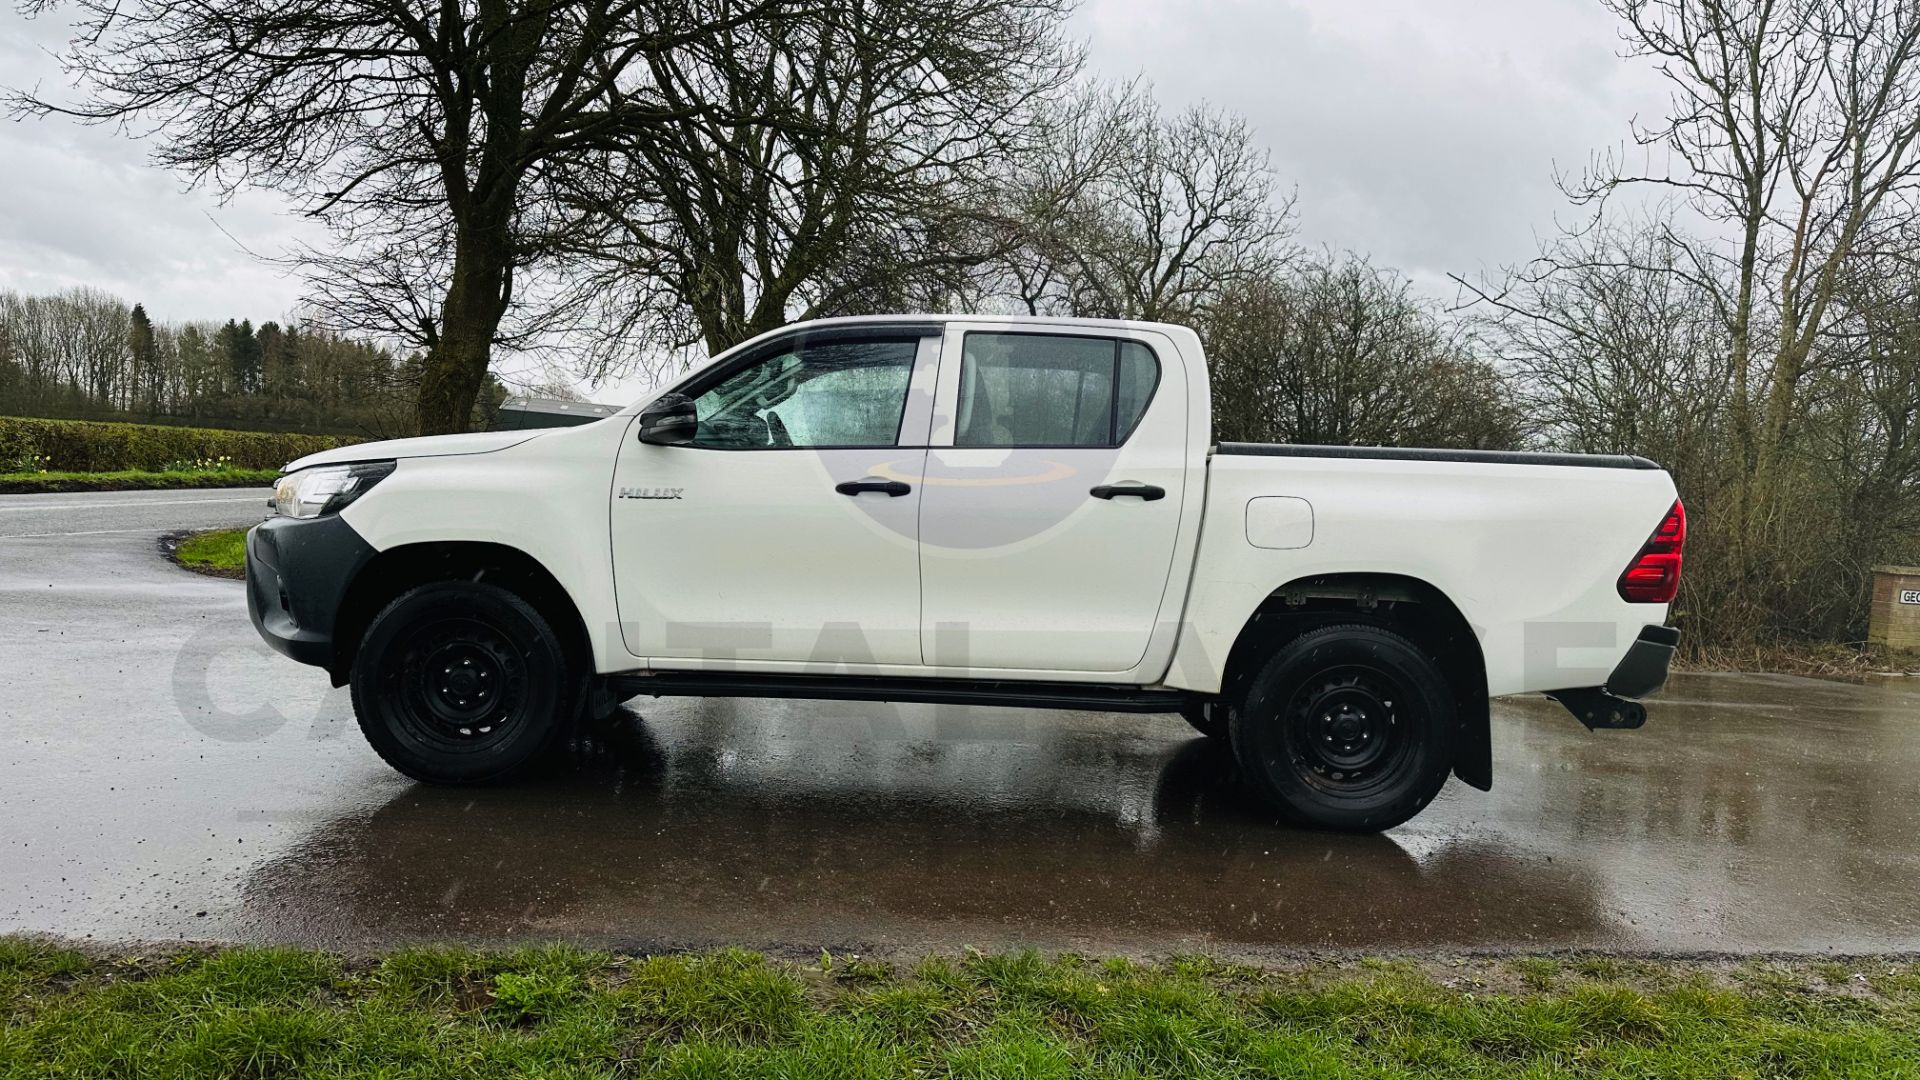 TOYOTA HILUX *DOUBLE CAB PICK-UP* (2020 - EURO 6) 2.4 D-4D - AUTO STOP/START *AIR CON* (1 OWNER) - Image 12 of 48